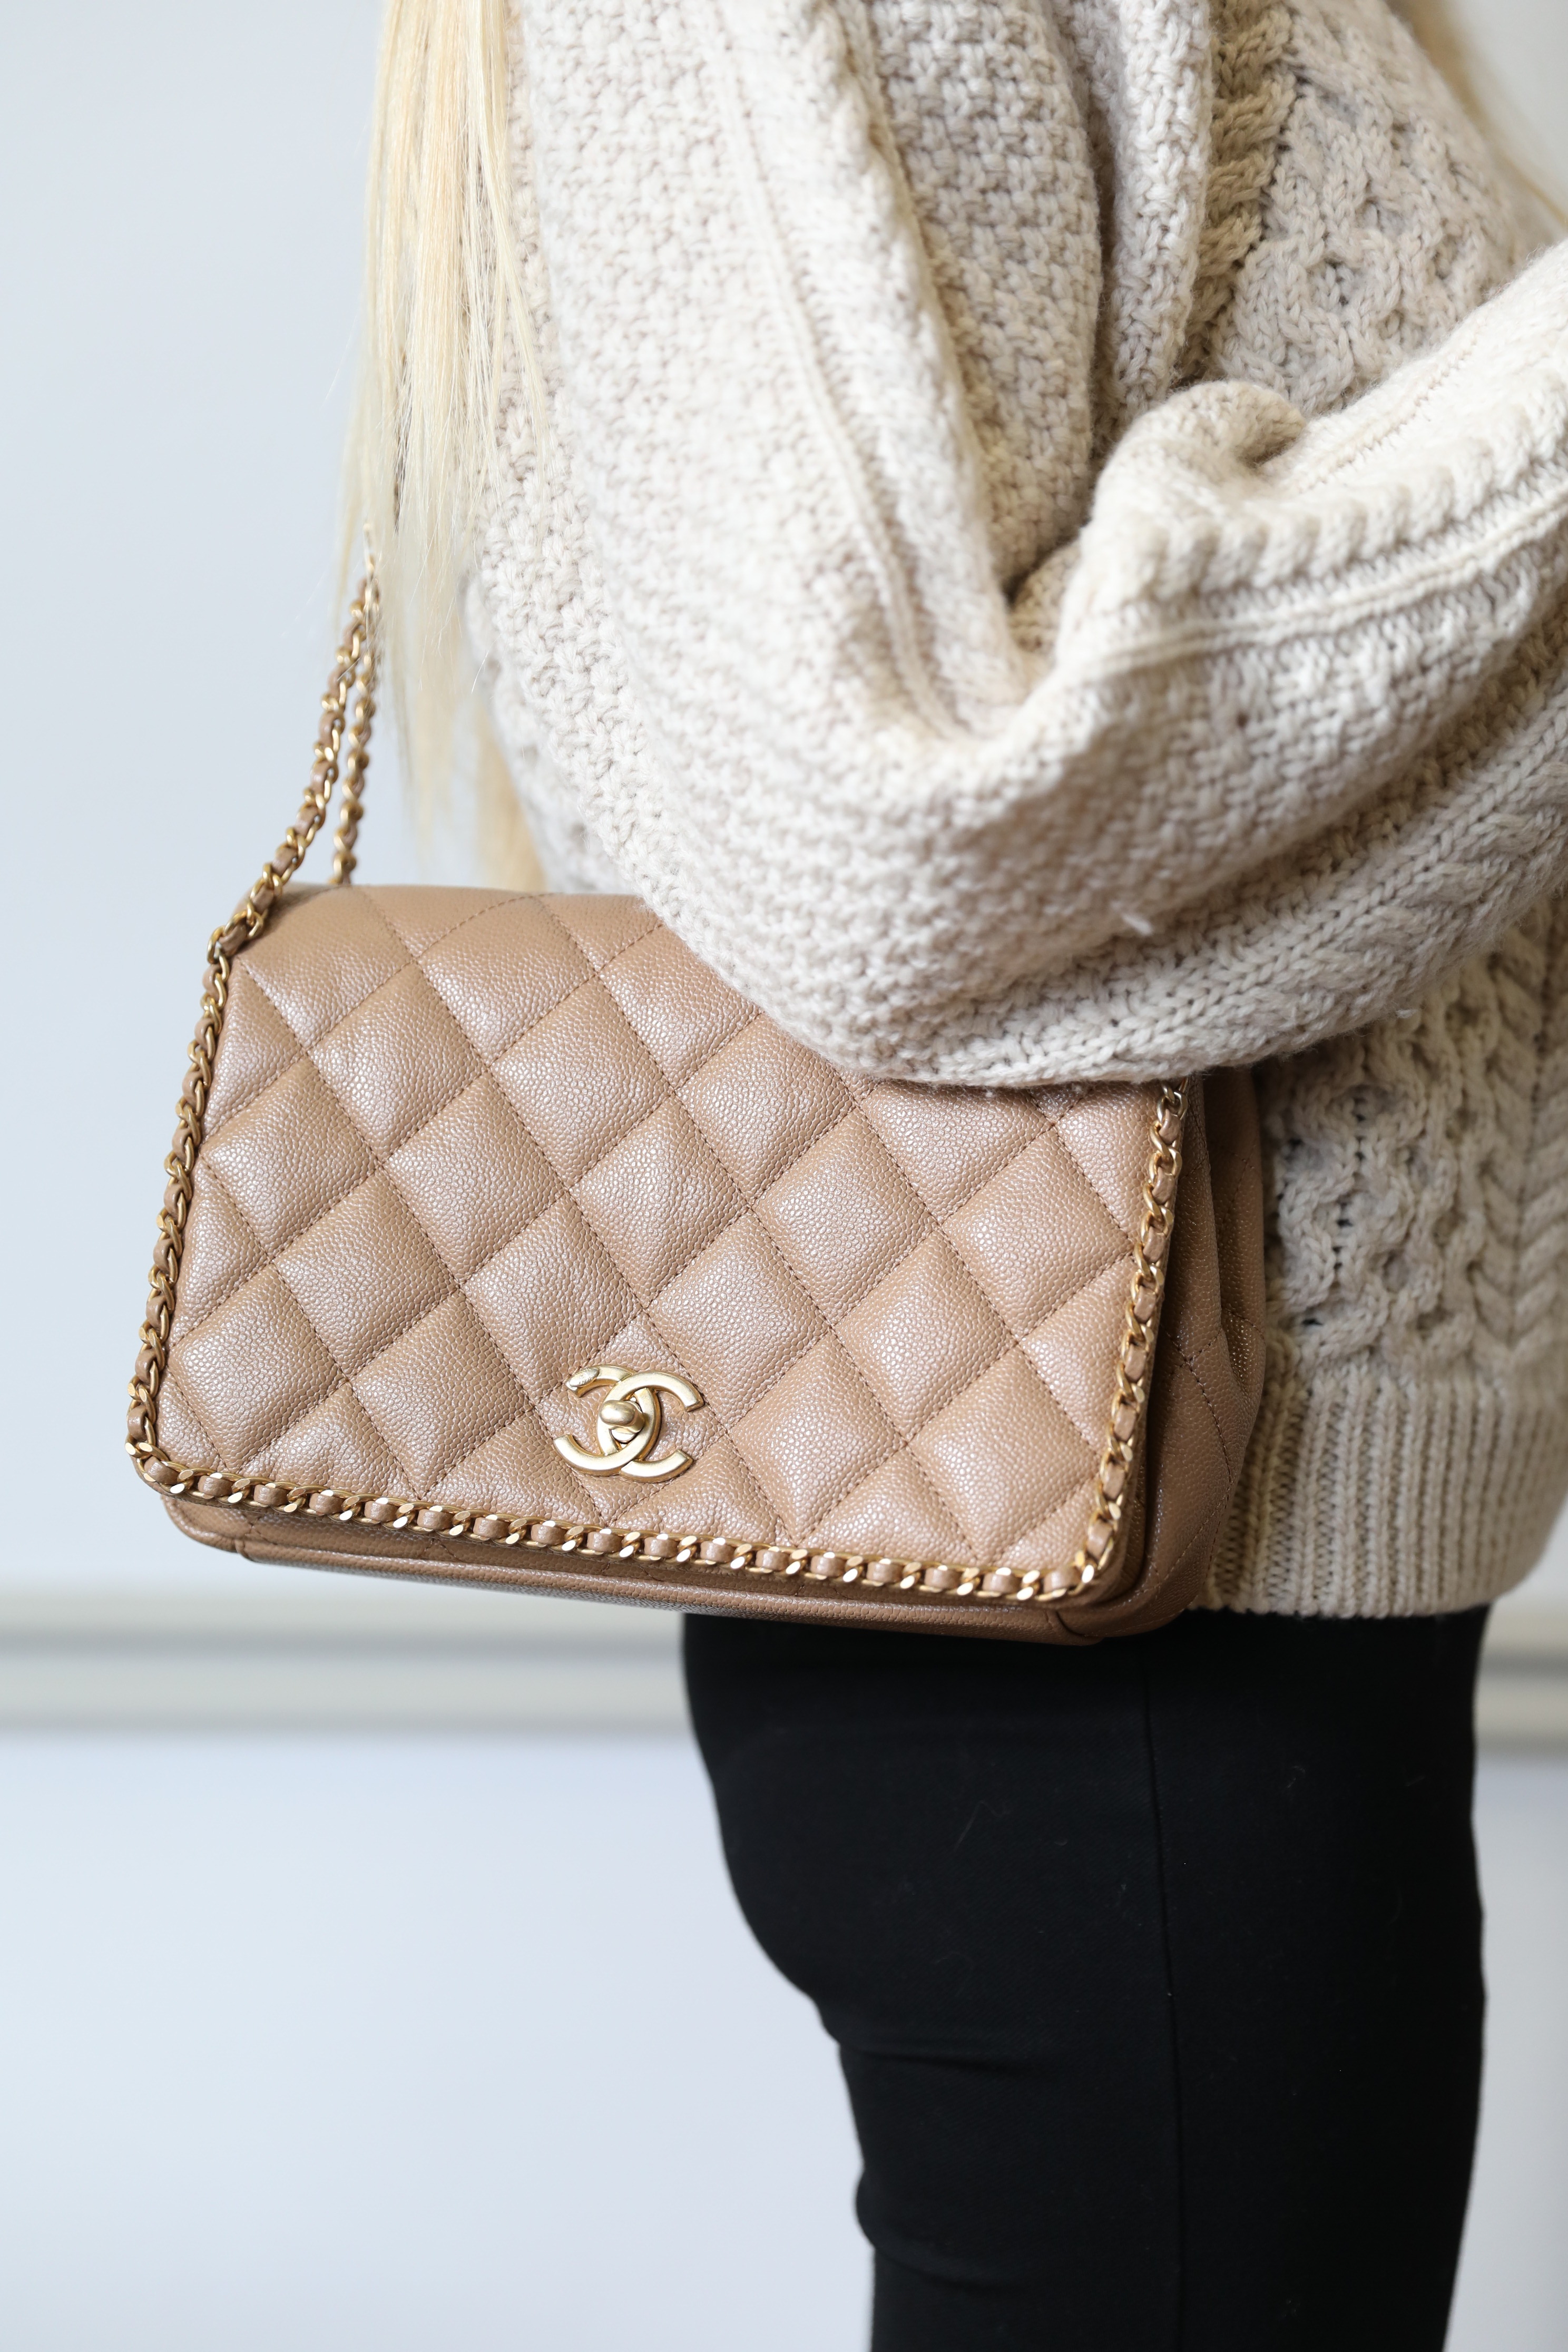 Chanel Business Affinity Large, Beige Caviar with Gold Hardware, Preowned  in Dustbag WA001 - Julia Rose Boston